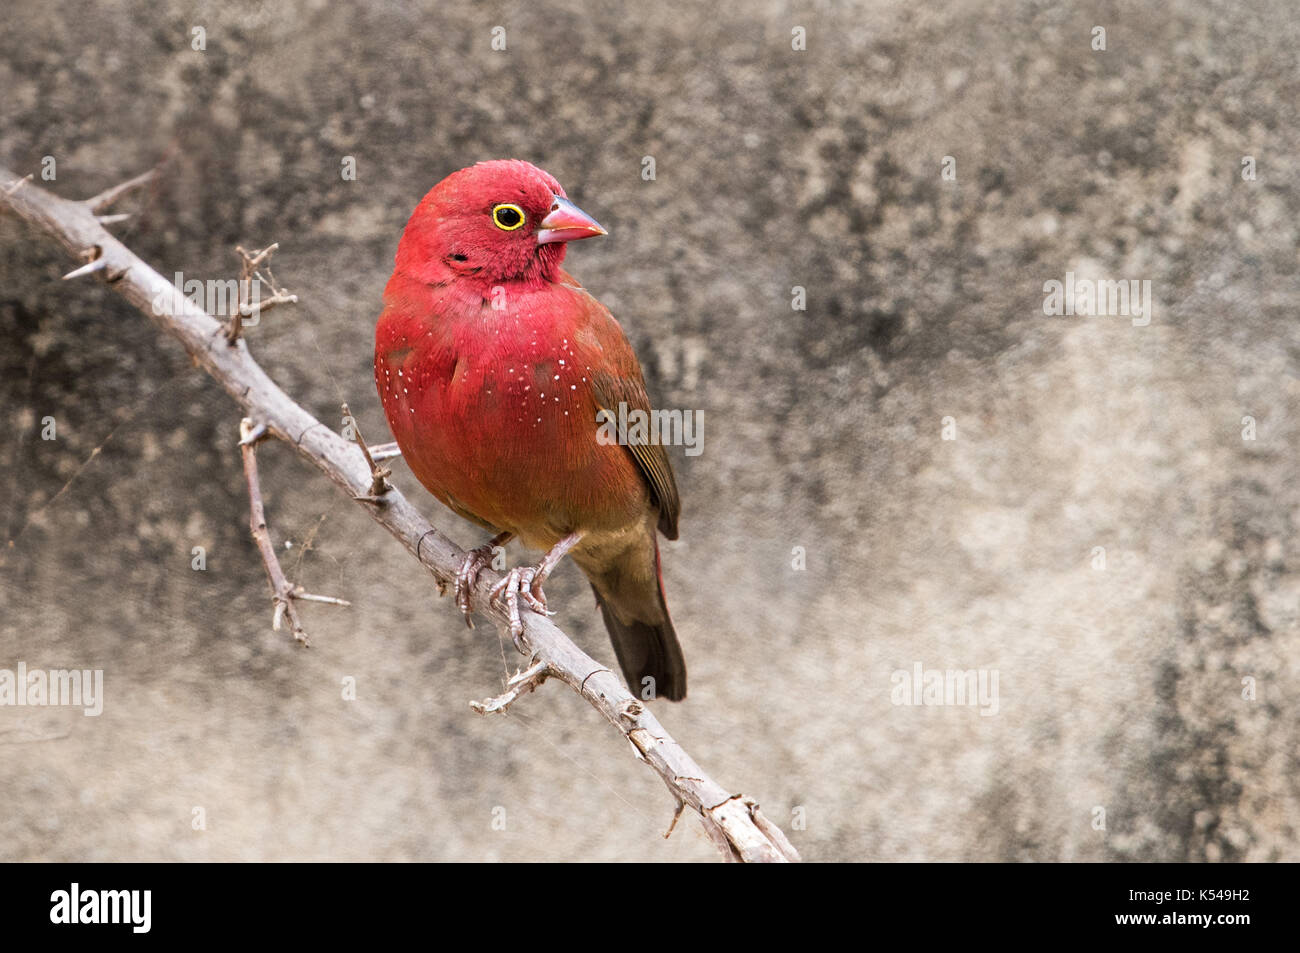 Red-billed fire finch Stock Photo